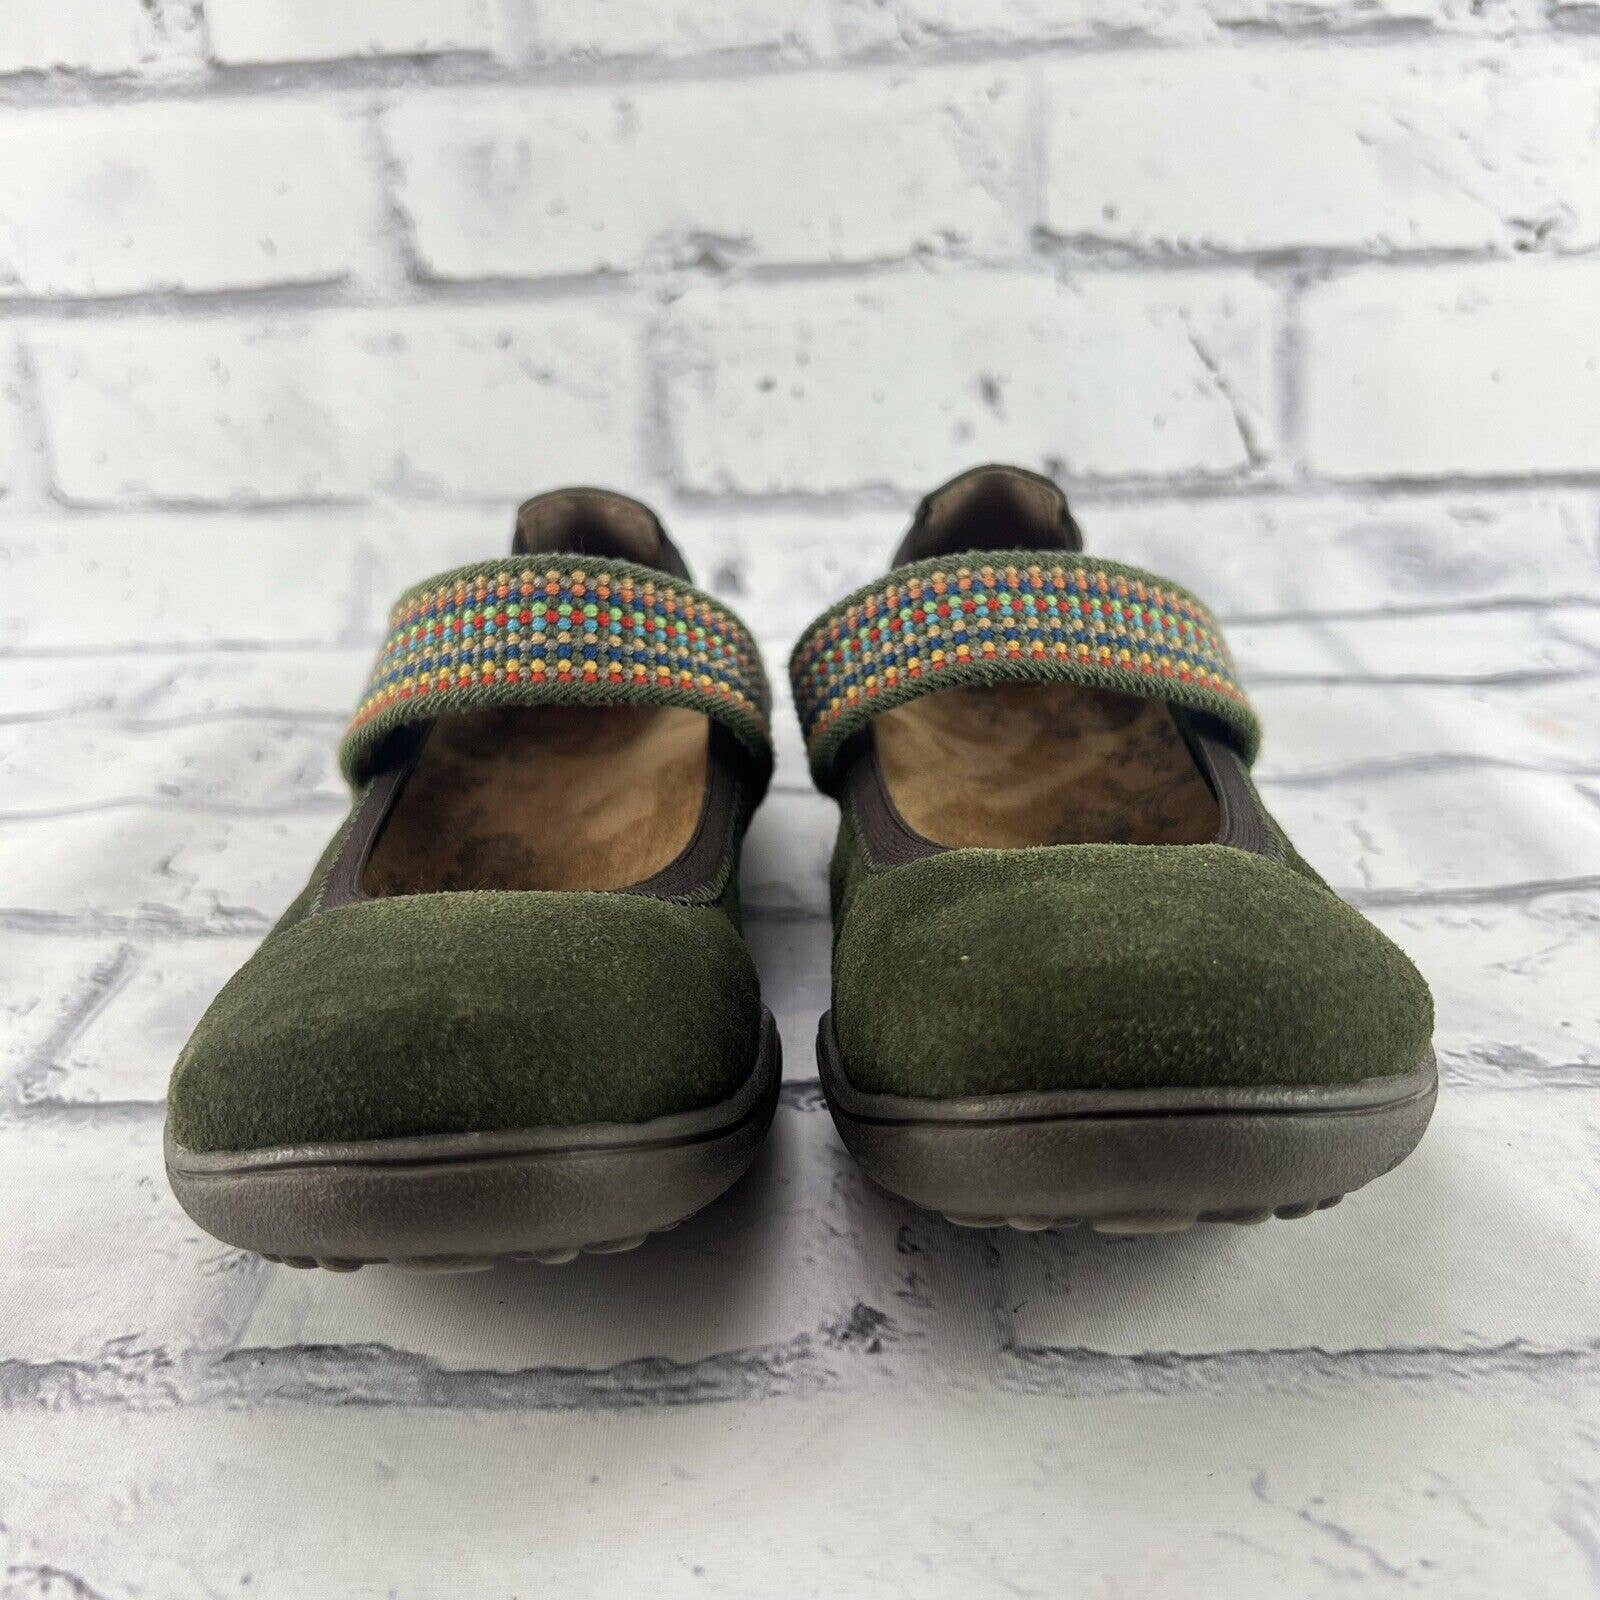 Taos Bandana Mary Jane Shoes Womens 6.5 Slip On Flats Casual Comfort Green Suede